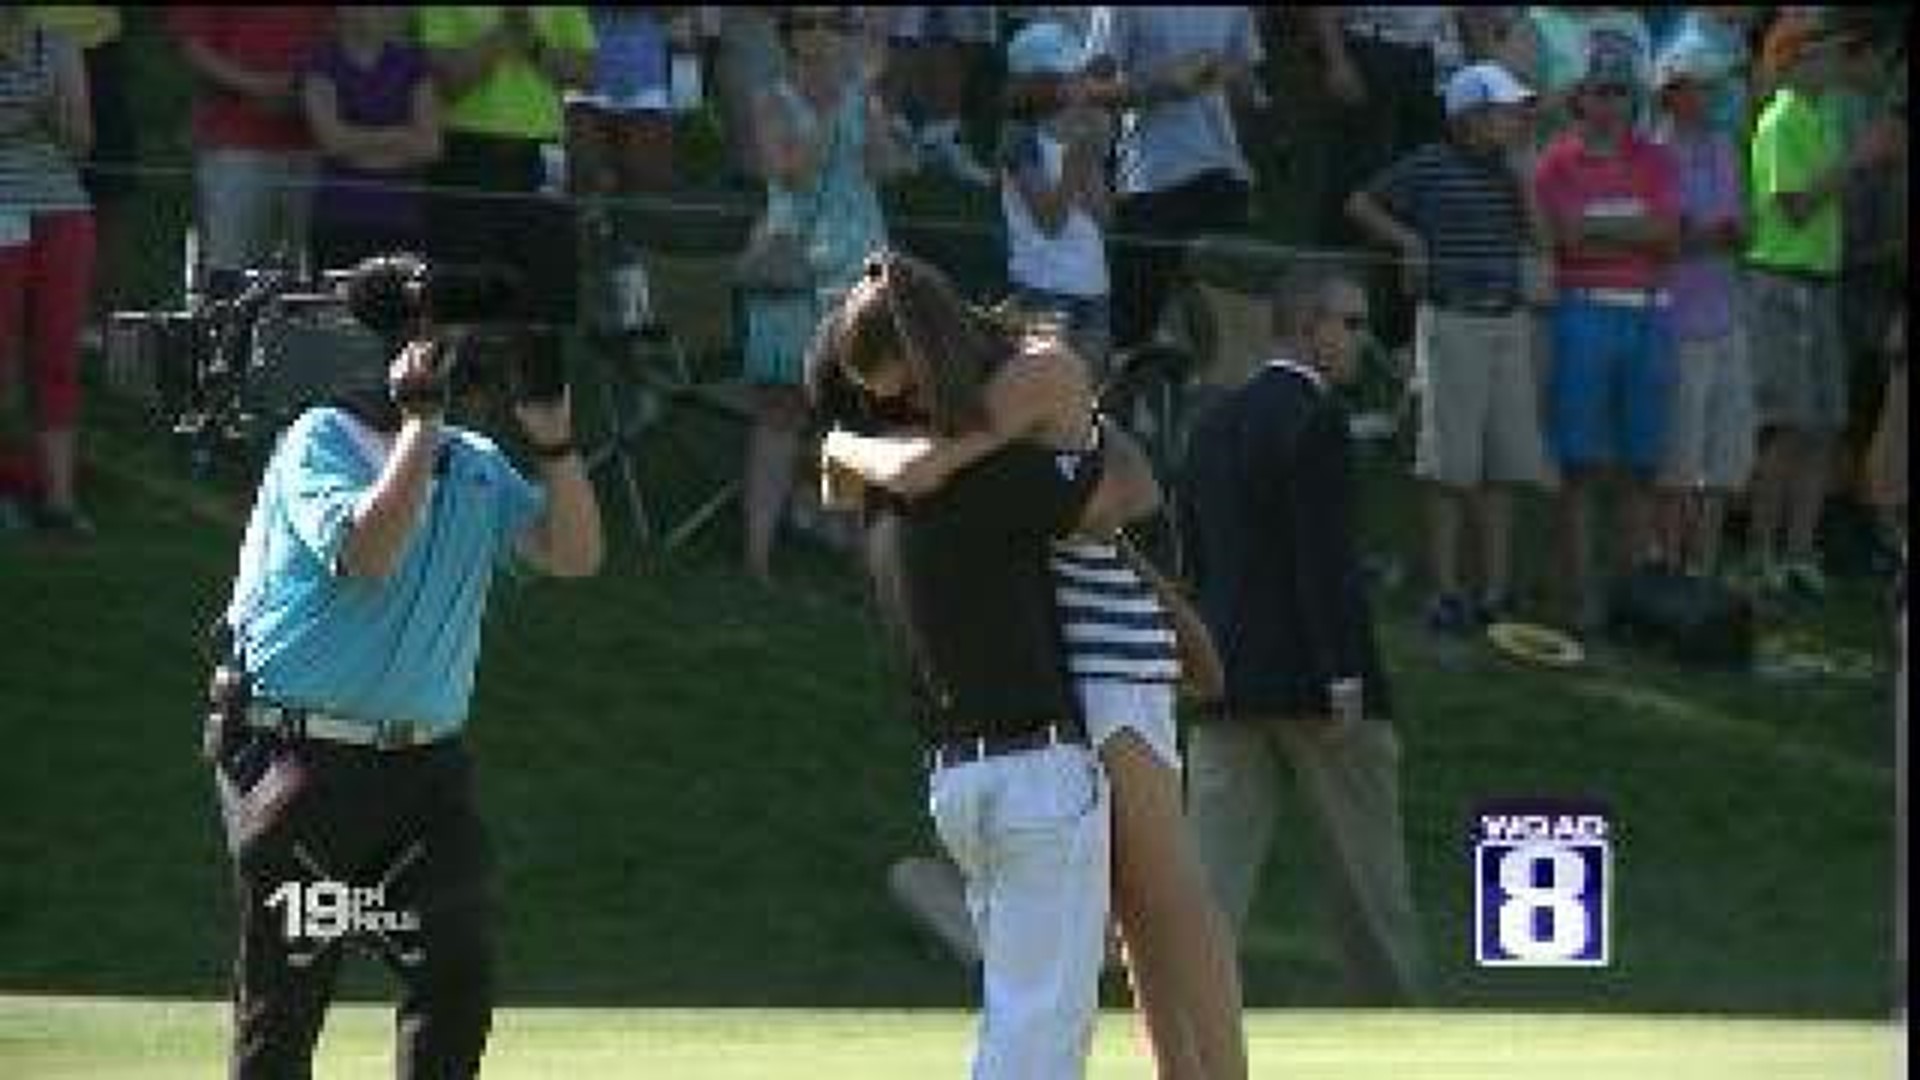 Highlights from the JDC final round